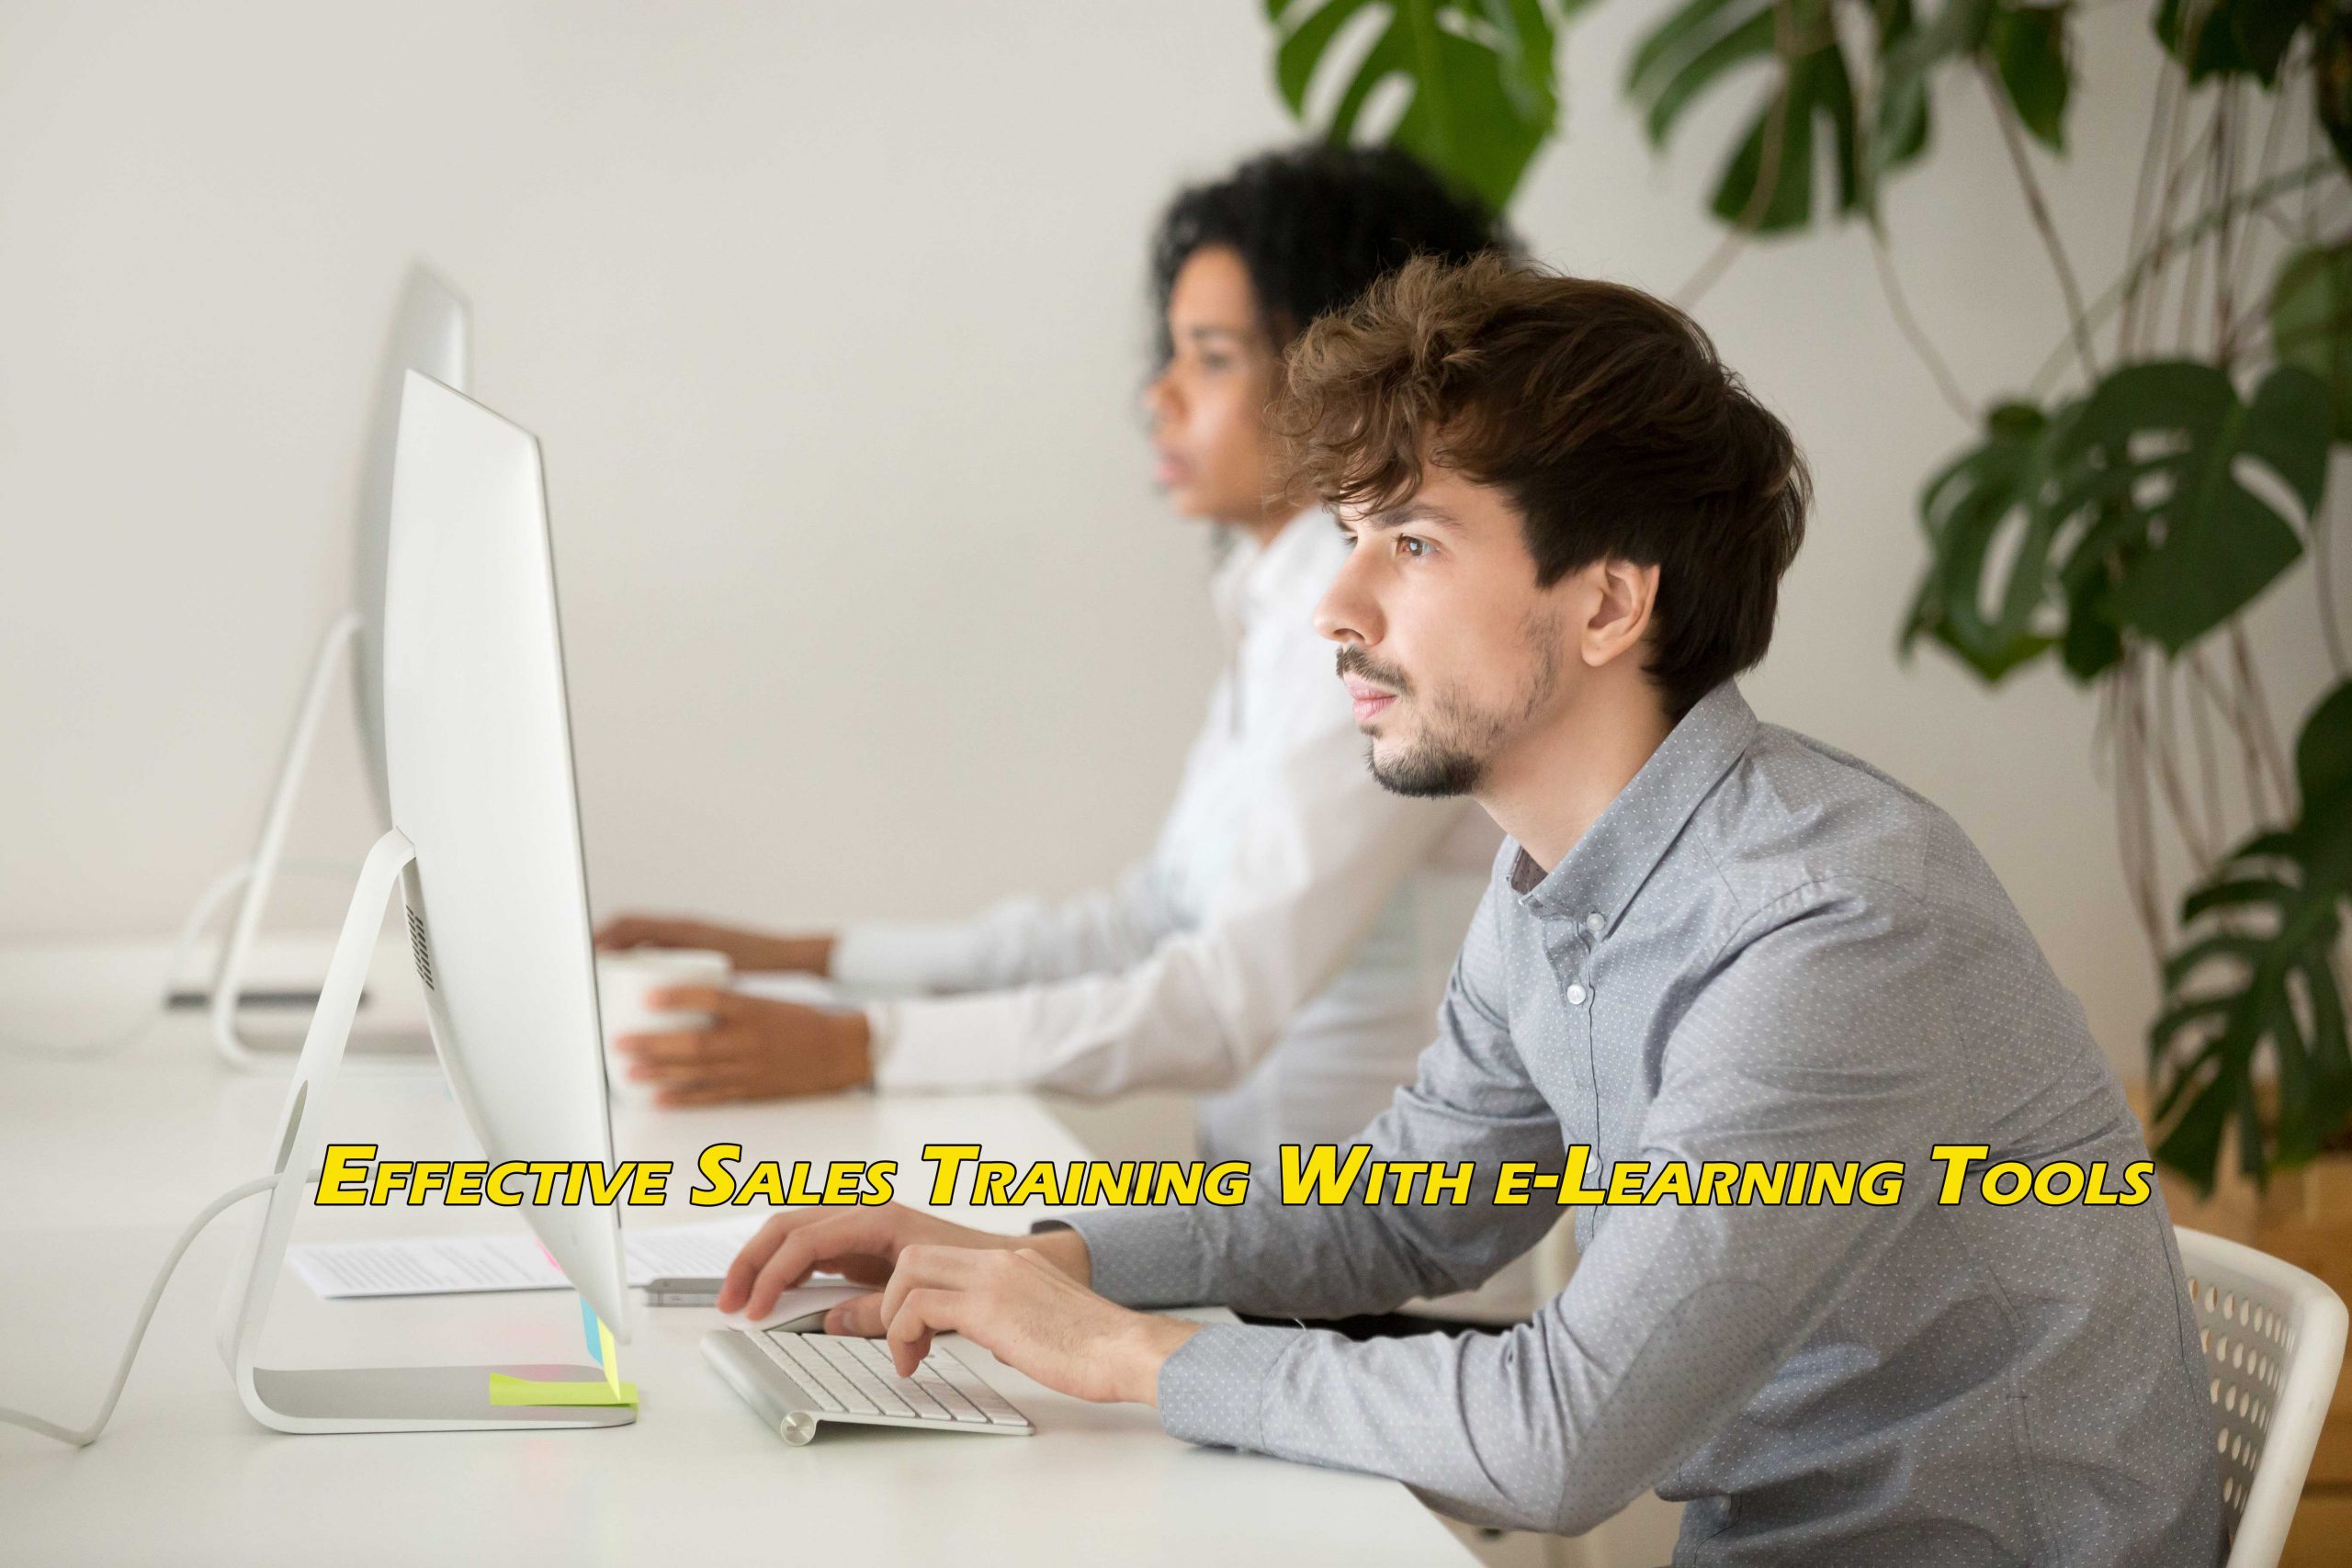 Effective Sales Training With e-Learning Tools